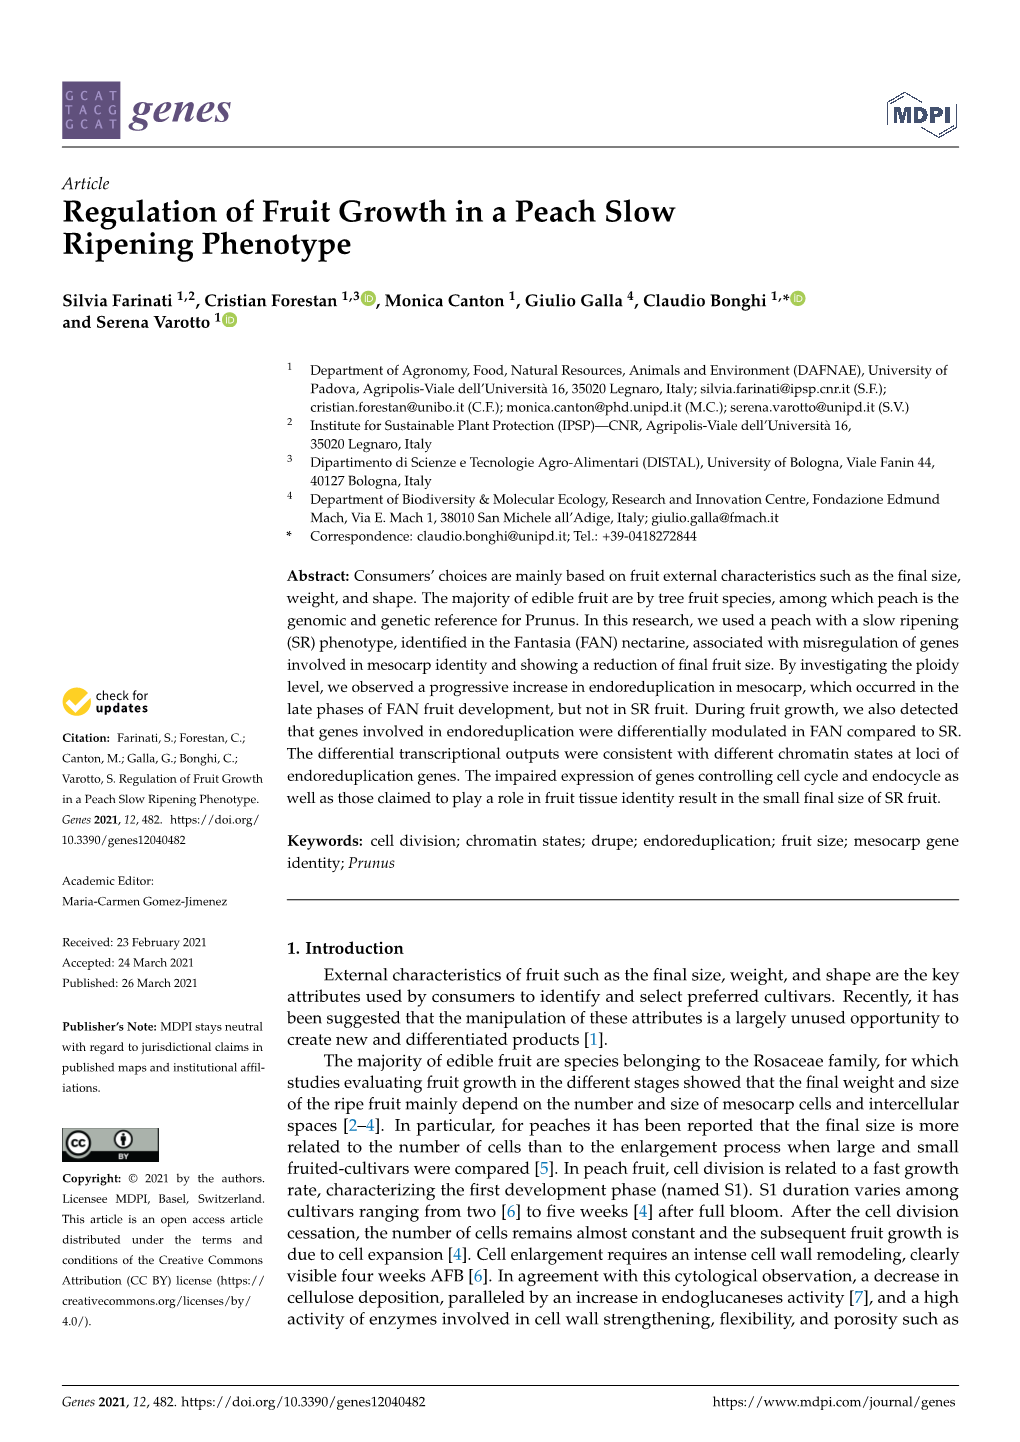 Regulation of Fruit Growth in a Peach Slow Ripening Phenotype